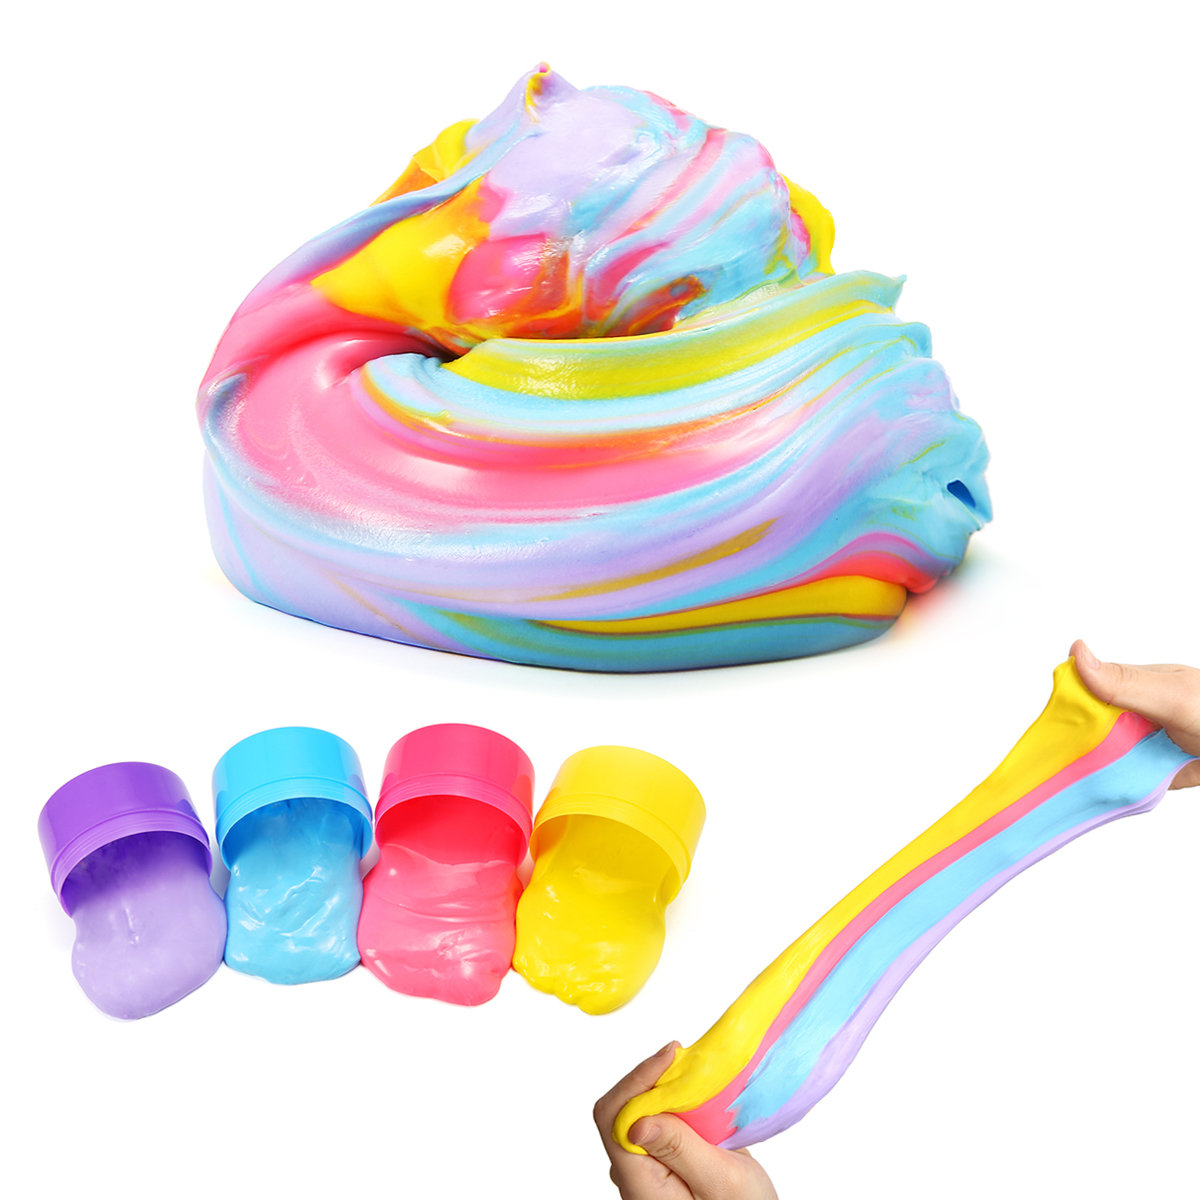 4PCS Colorful Clay Non Toxic Puff Slime DIY Environmental Toy